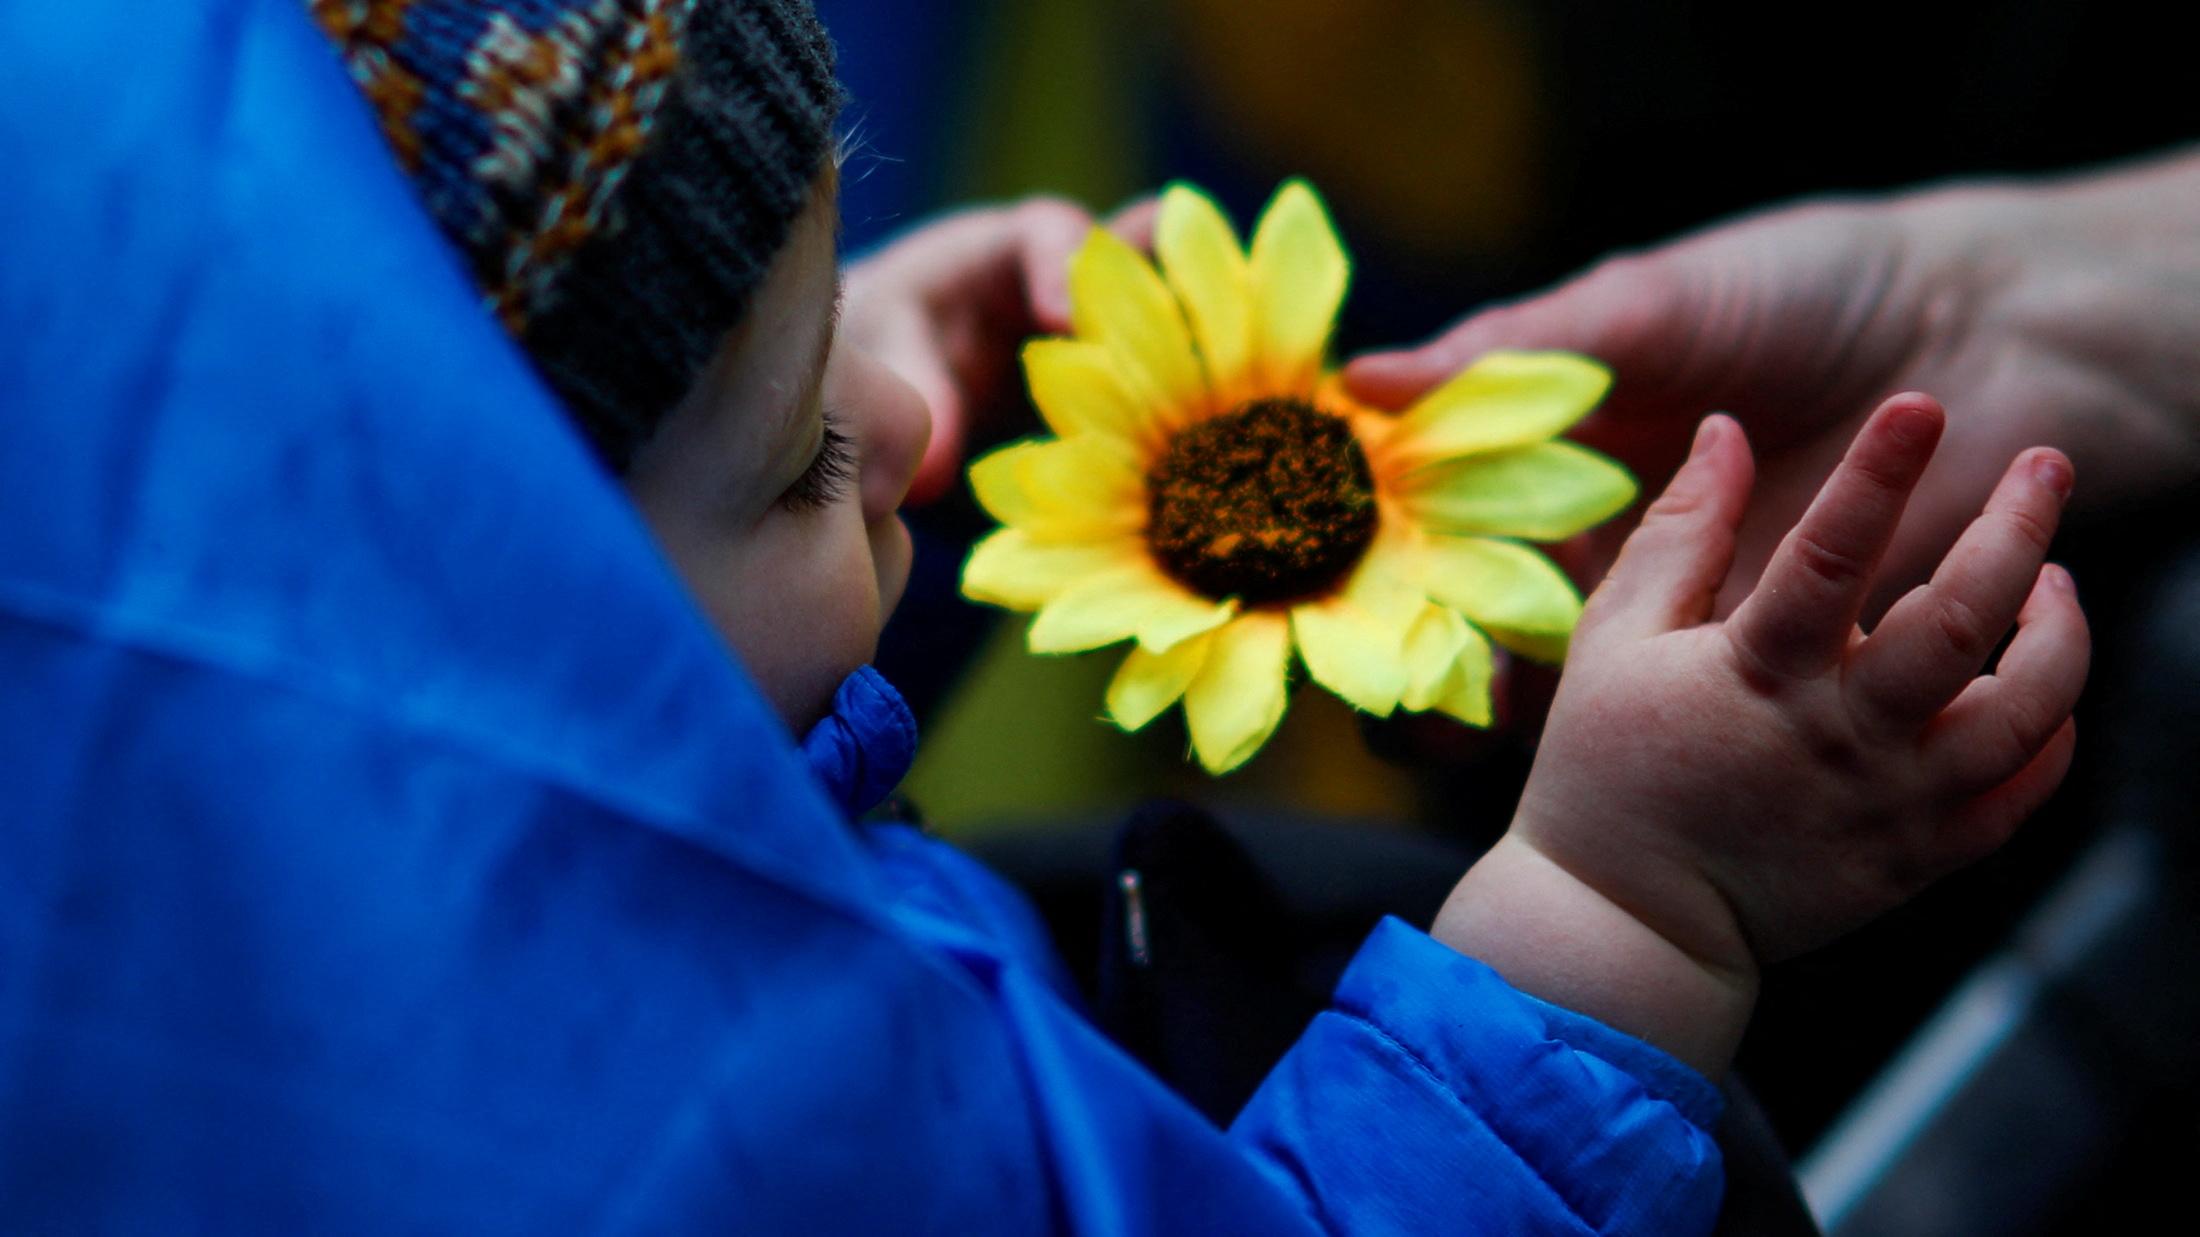 A baby in a blue coat plays with an artificial yellow sunflower. The colors of the photo evoke the blue and yellow of the Ukrainian flag.